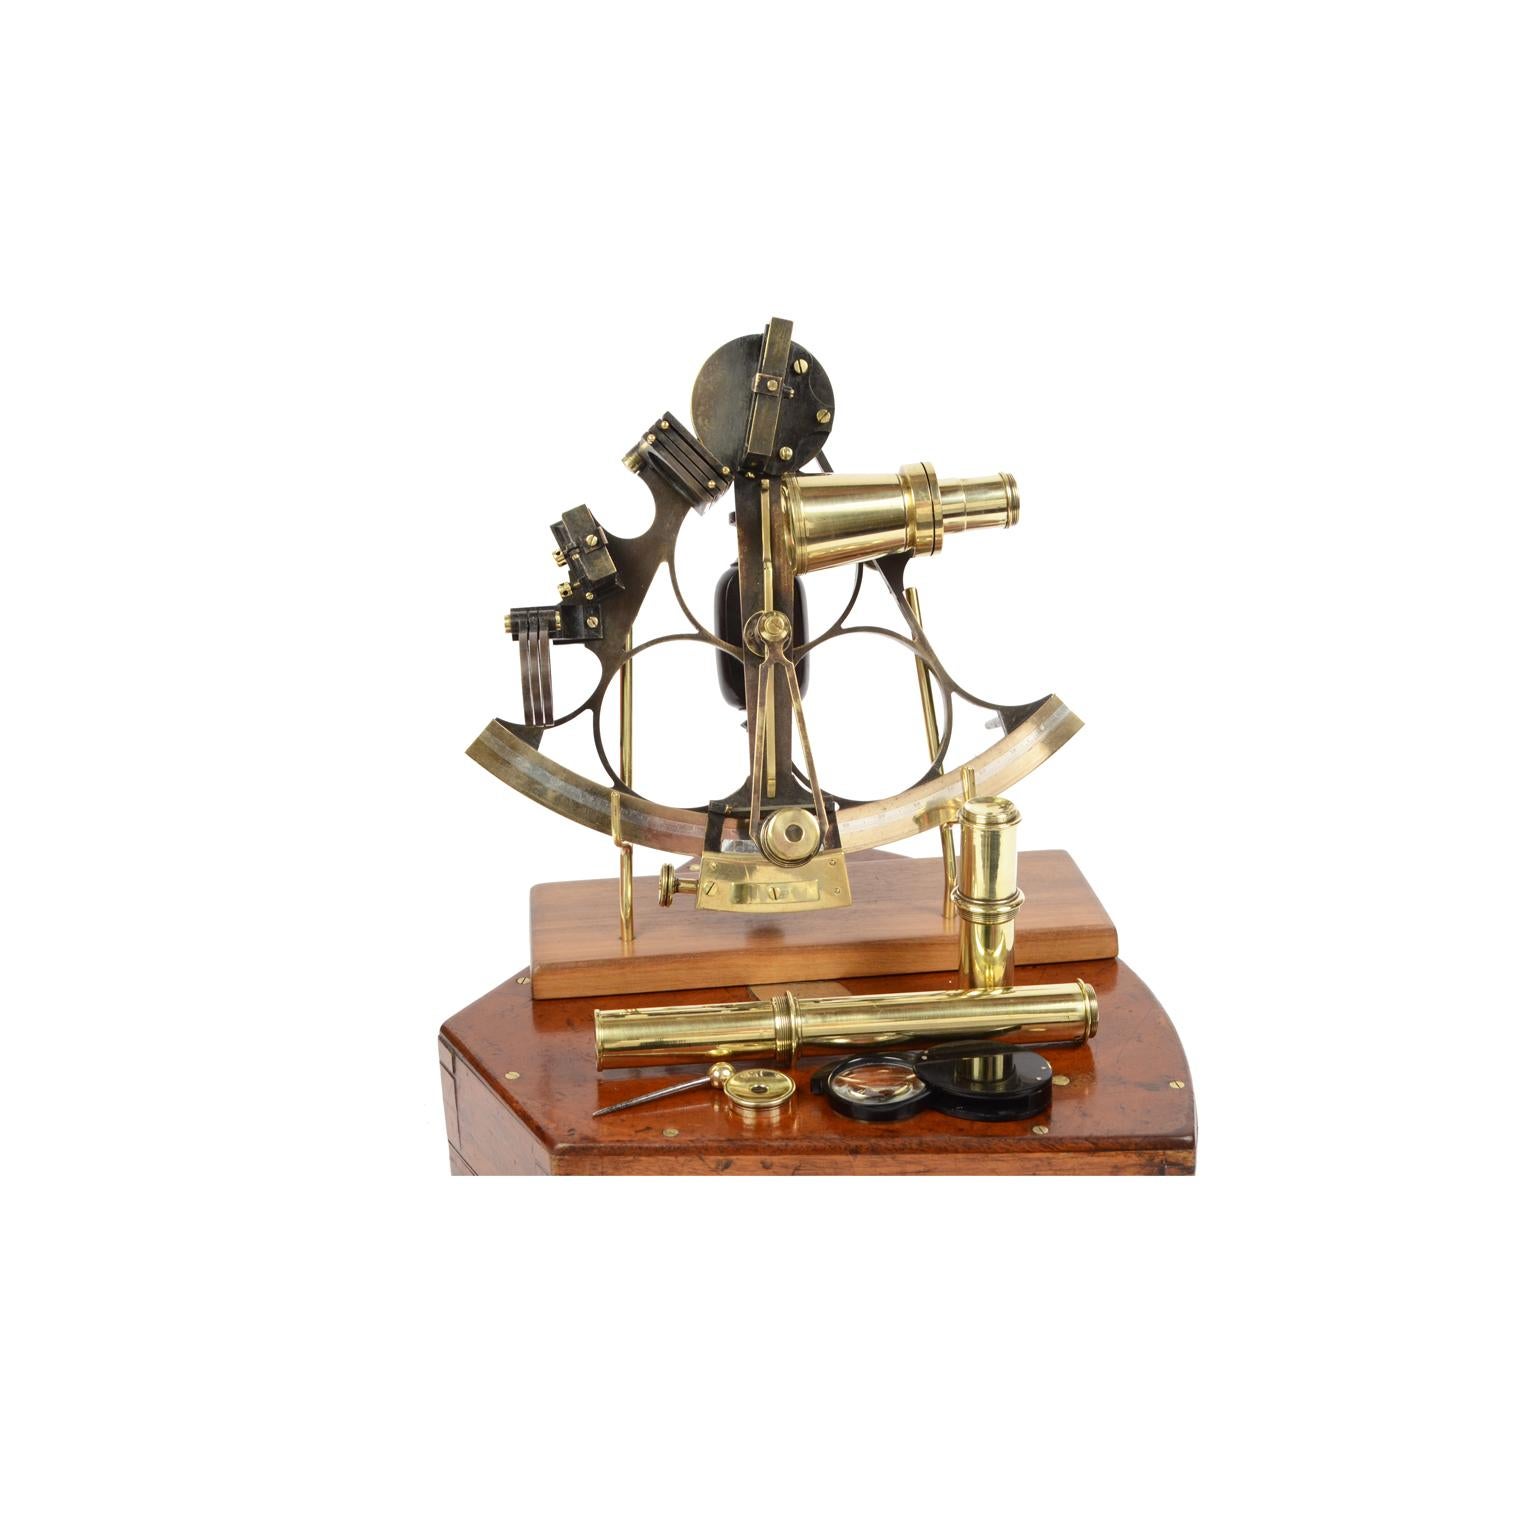 Burnished brass sextant made in the second half of the 19th century and placed in its beautiful original mahogany wood box shaped like the instrument, complete with a key lock with hinges and brass hooks. Flap and vernier made of silver, ebony